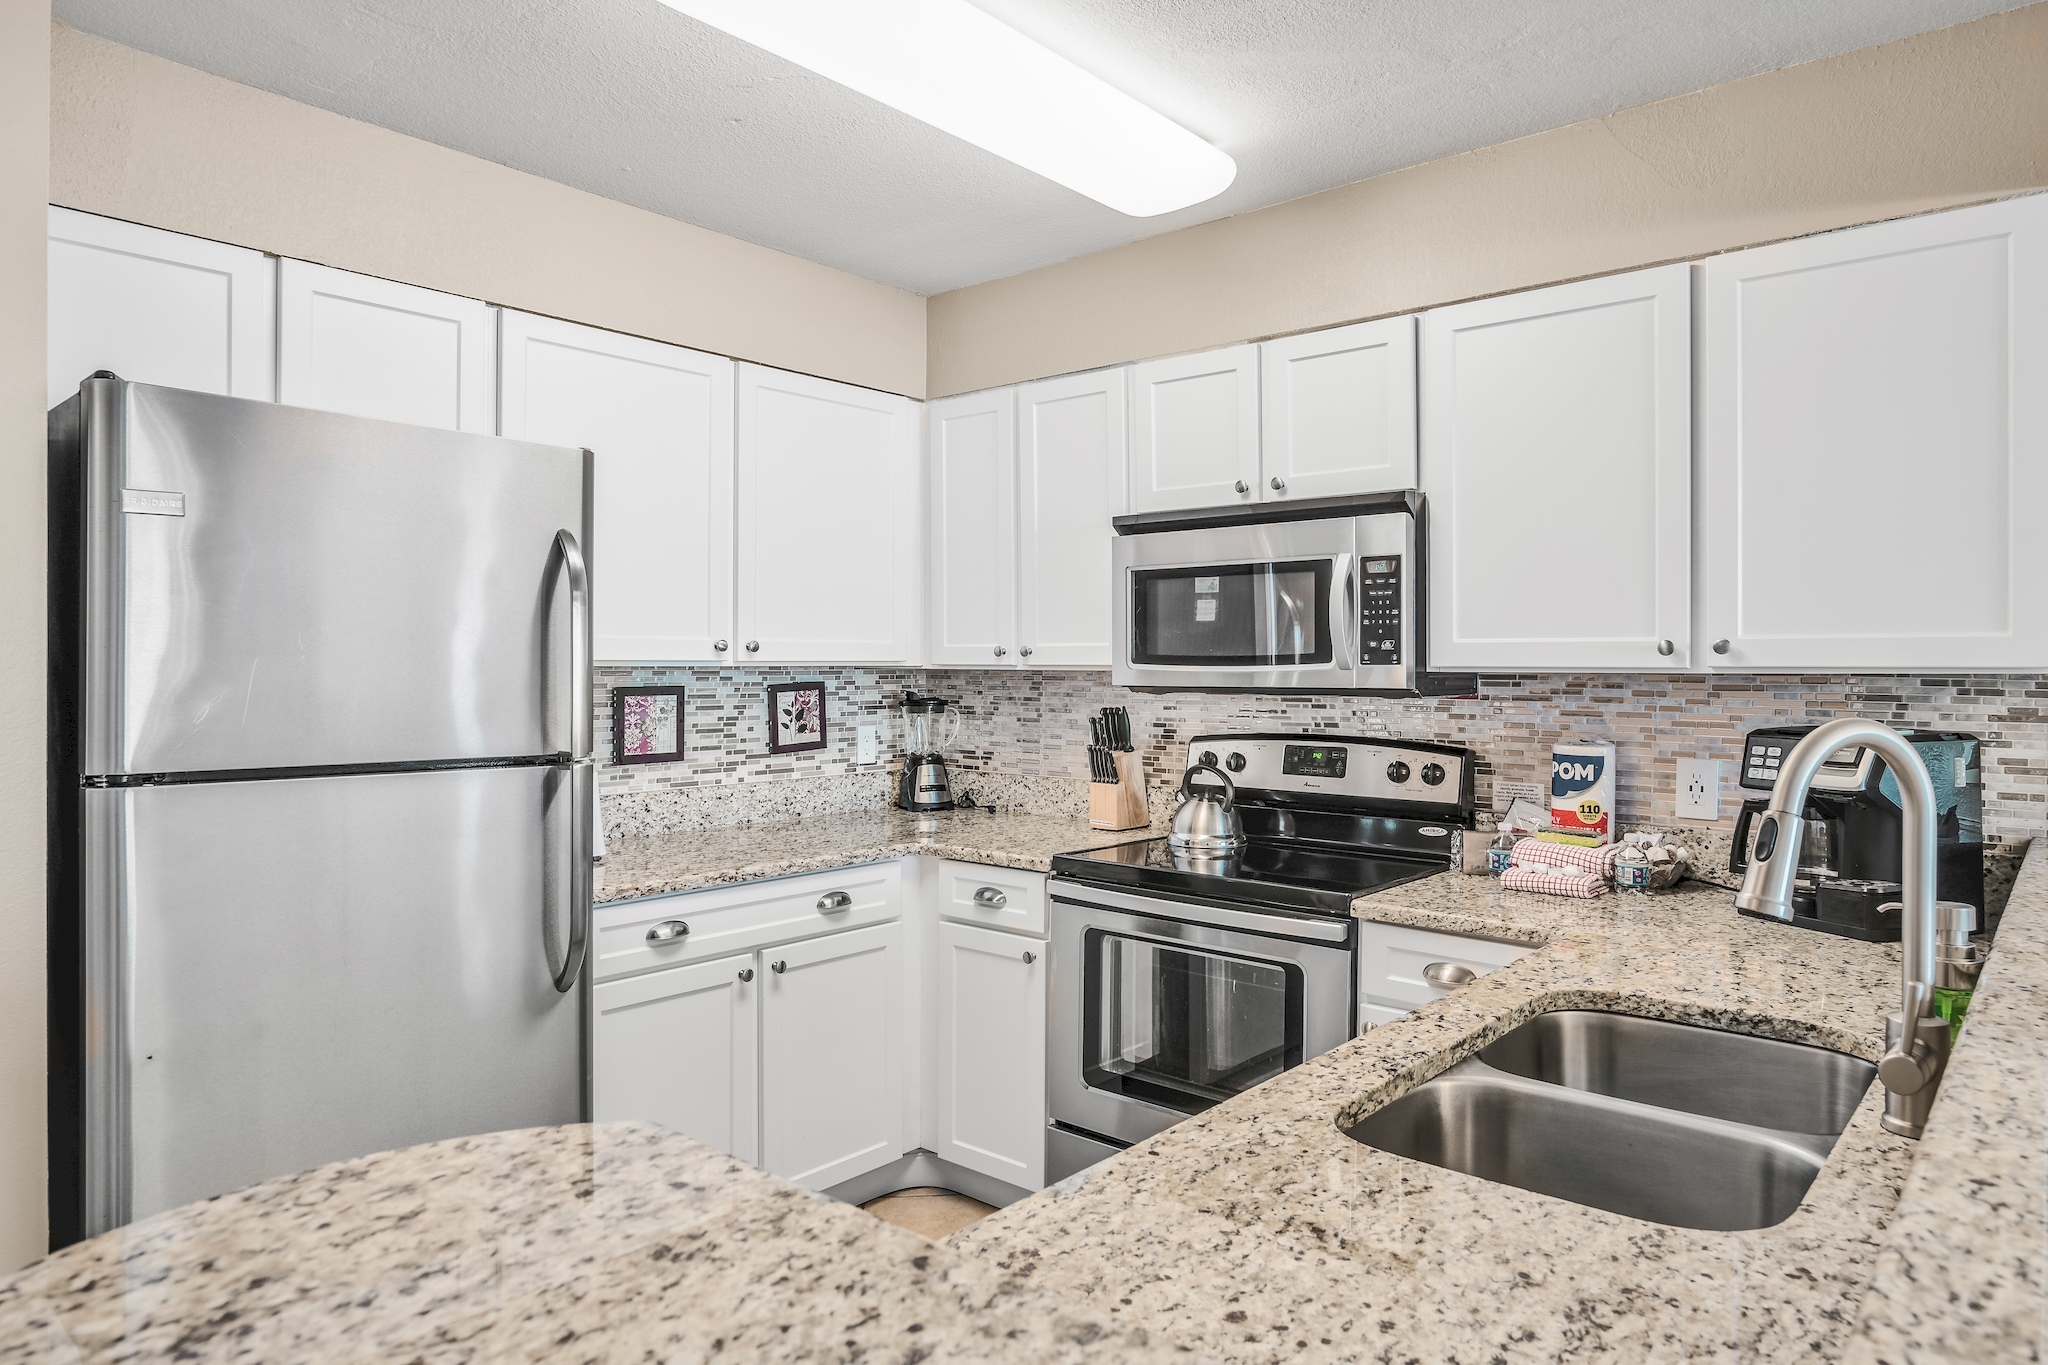 Full kitchen with stainless appliances